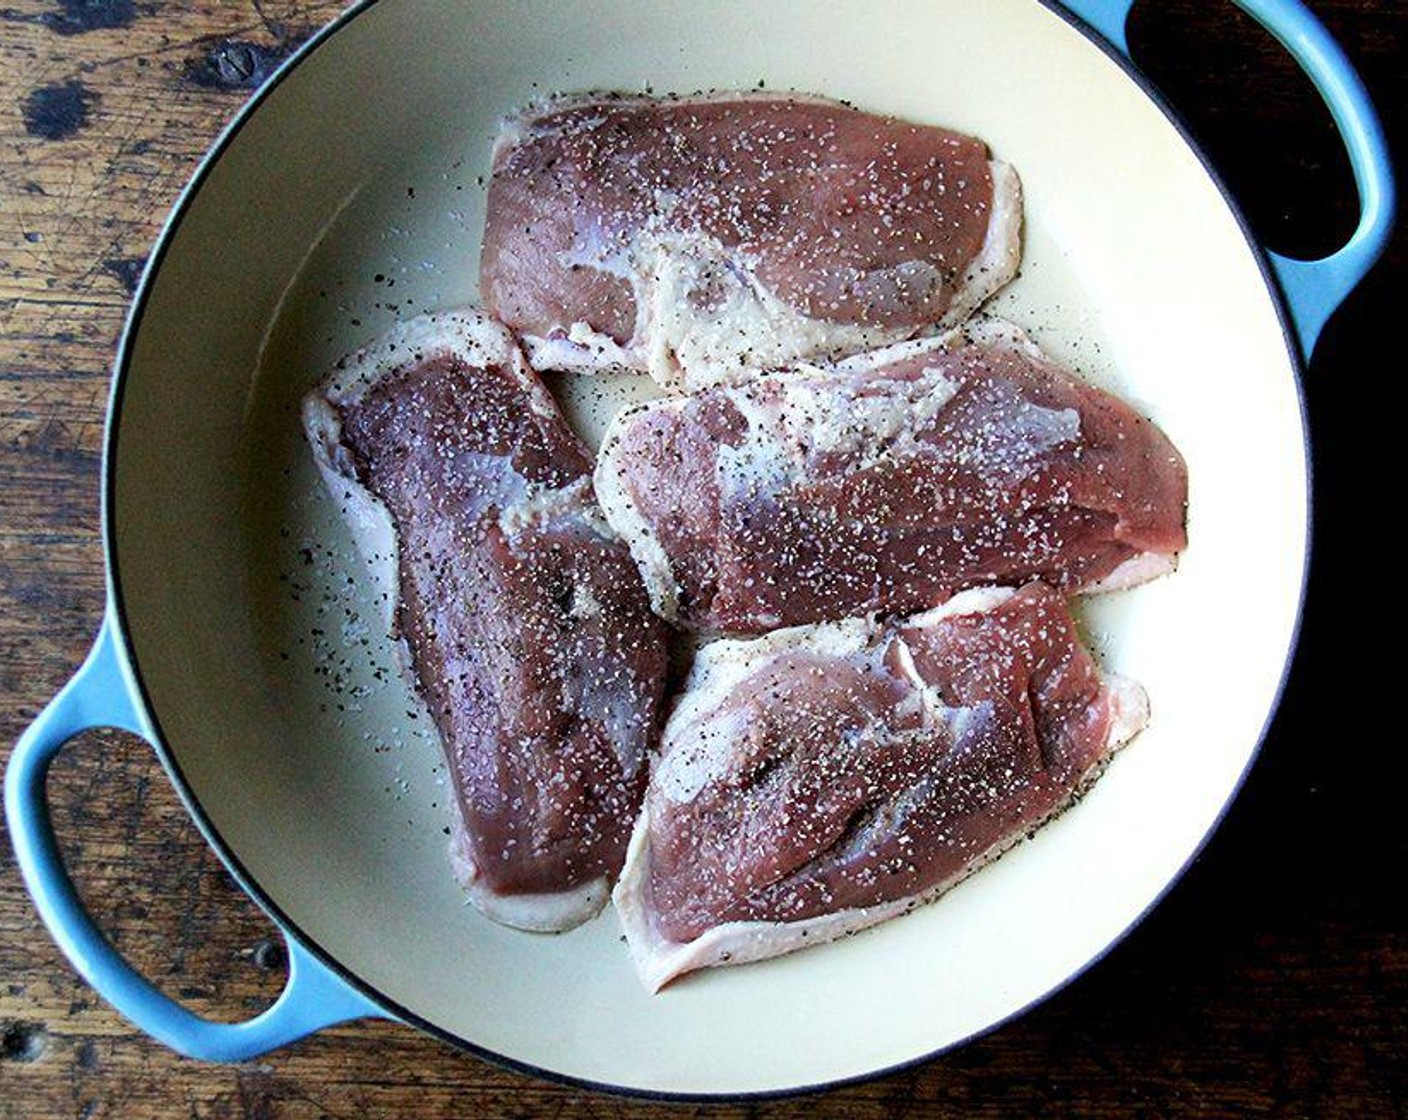 step 5 Place the skillet over low heat and cook for 3 minutes. Increase the heat to medium, and continue cooking until the duck begins to sizzle. Continue cooking undisturbed until the skin is browned, crisp, and has rendered most of its fat, 6 to 8 minutes.